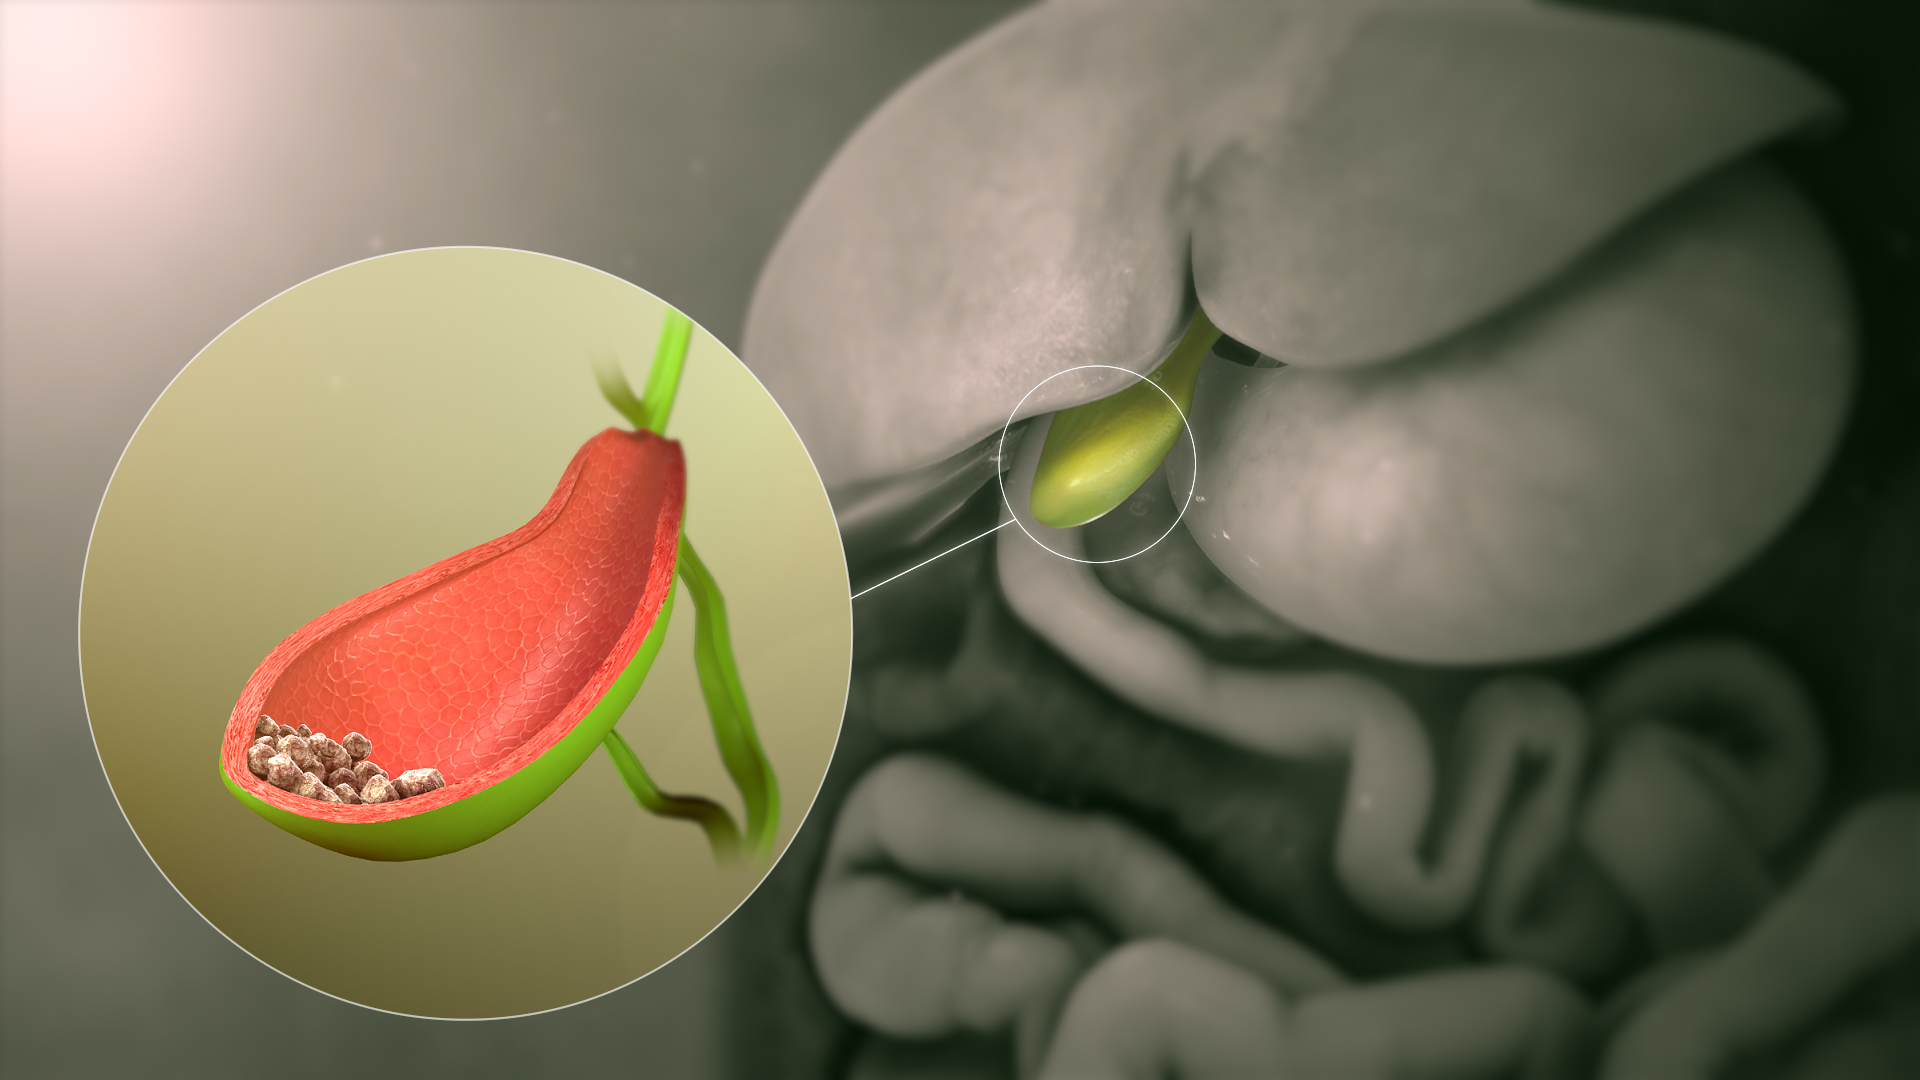 Gallstones Symptoms Causes Risks Treatment Diet and More